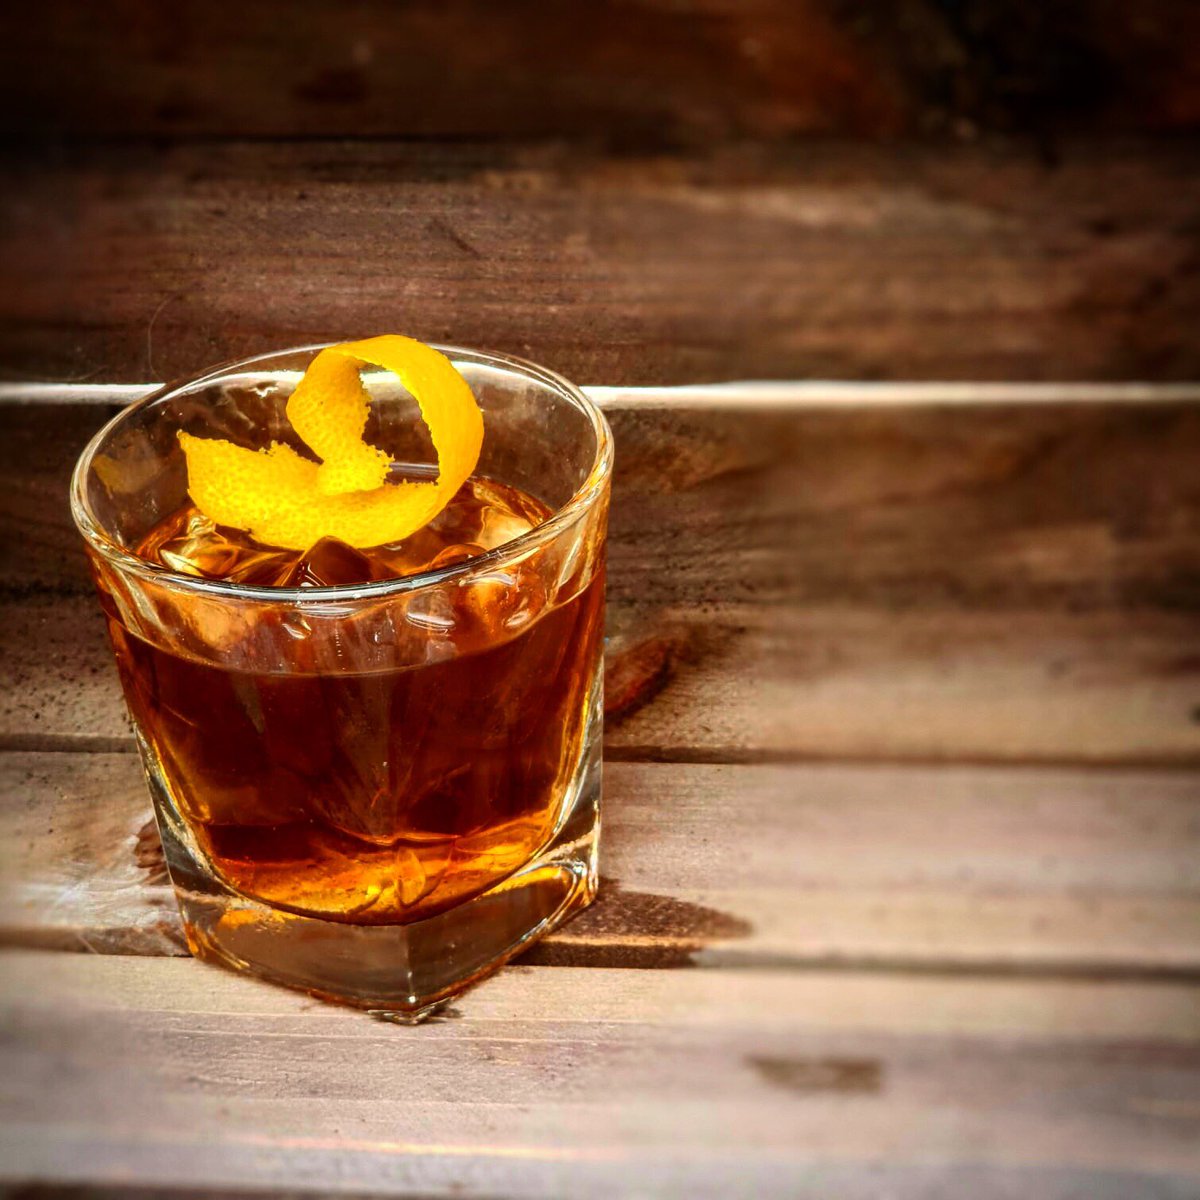 Old fashioned is only one of the many classic #cocktails we serve here at the Castle! Start your weekend in style! 🍊 #cocktail #whiskycocktail #oldfashioned #classic #friday #thankgoditsfriday #harrowonthehill